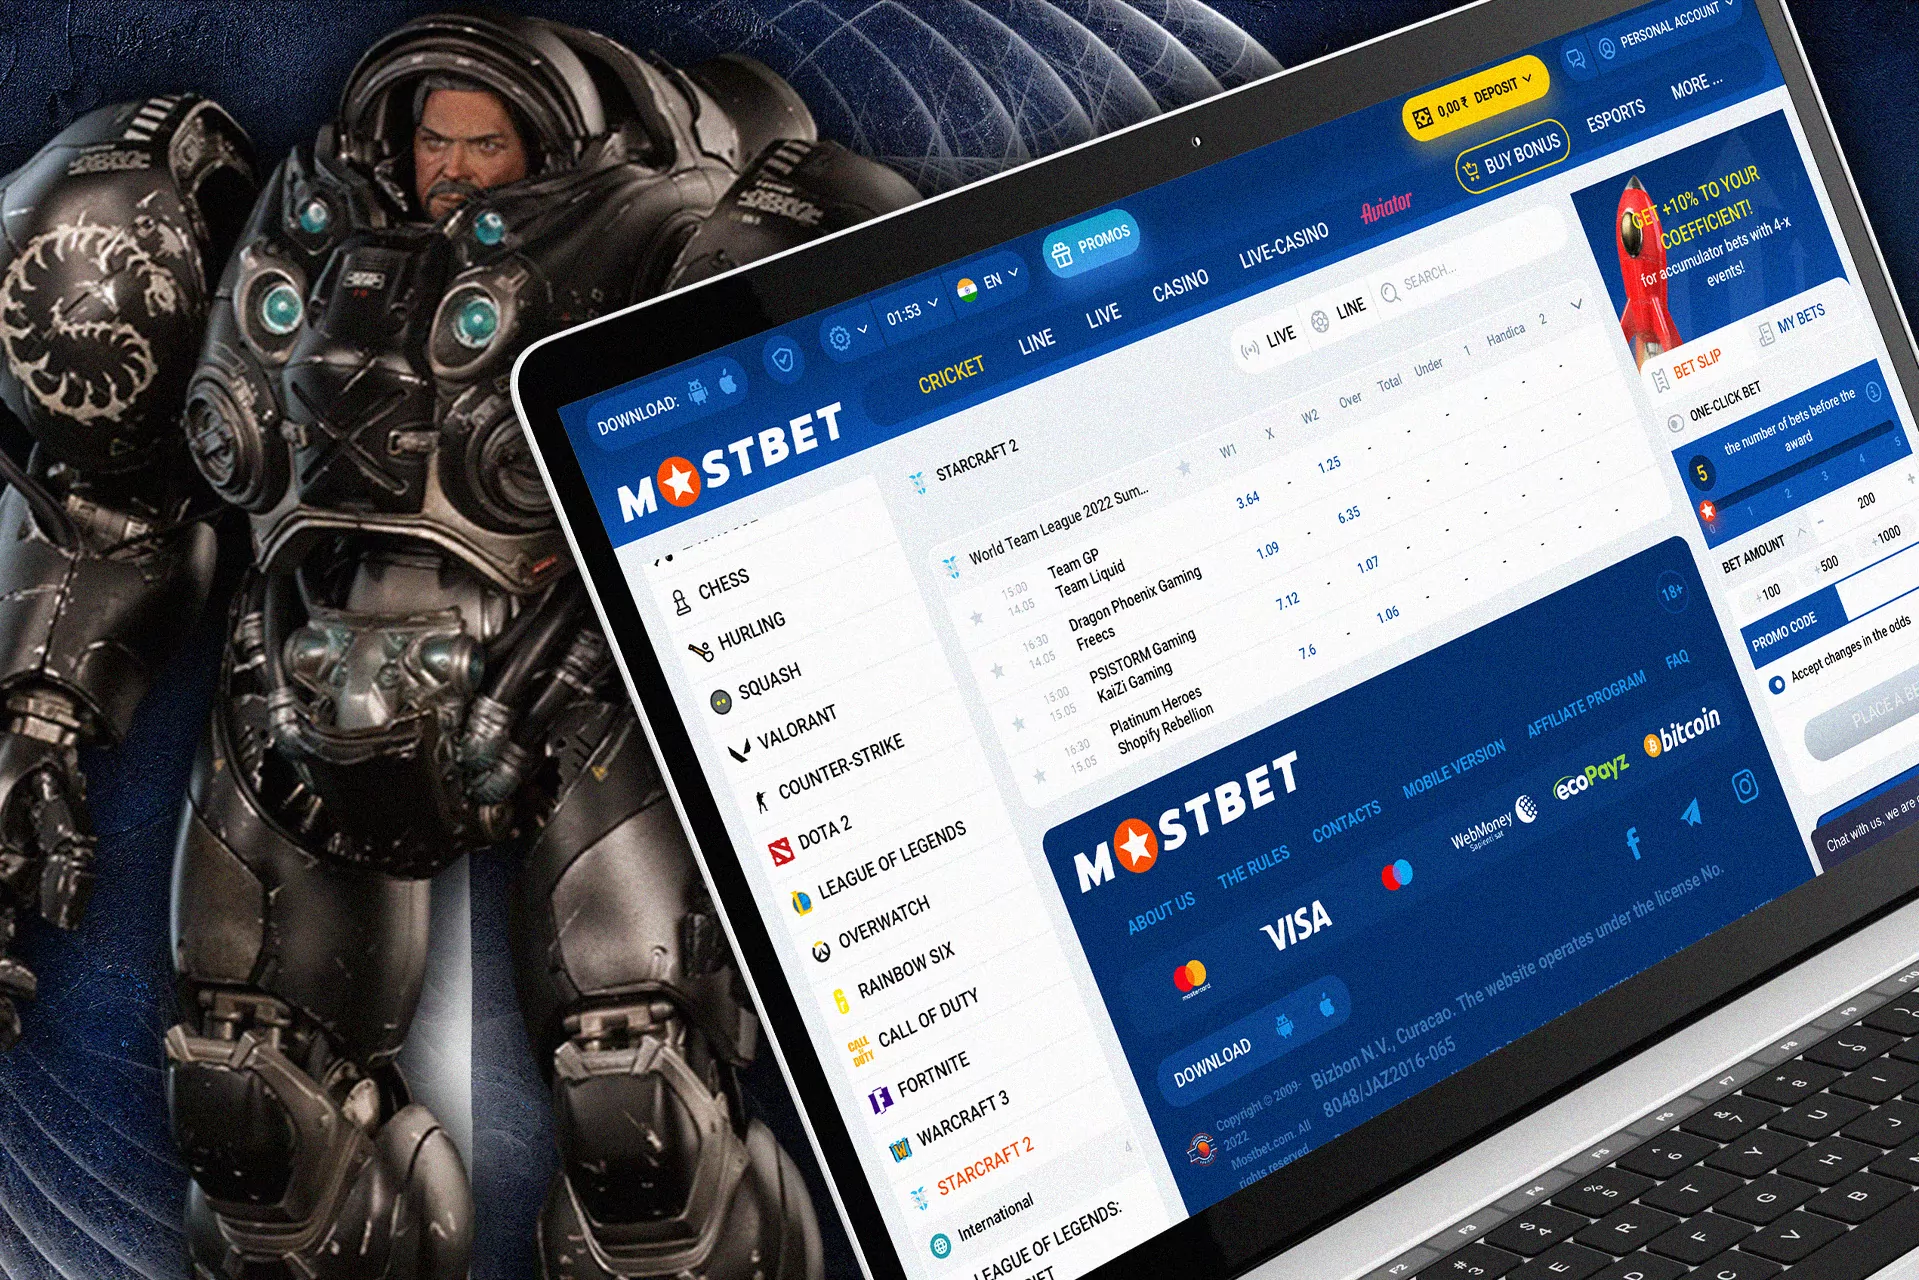 Bet on Starcraft 2 with ease on the official website Mostbet.